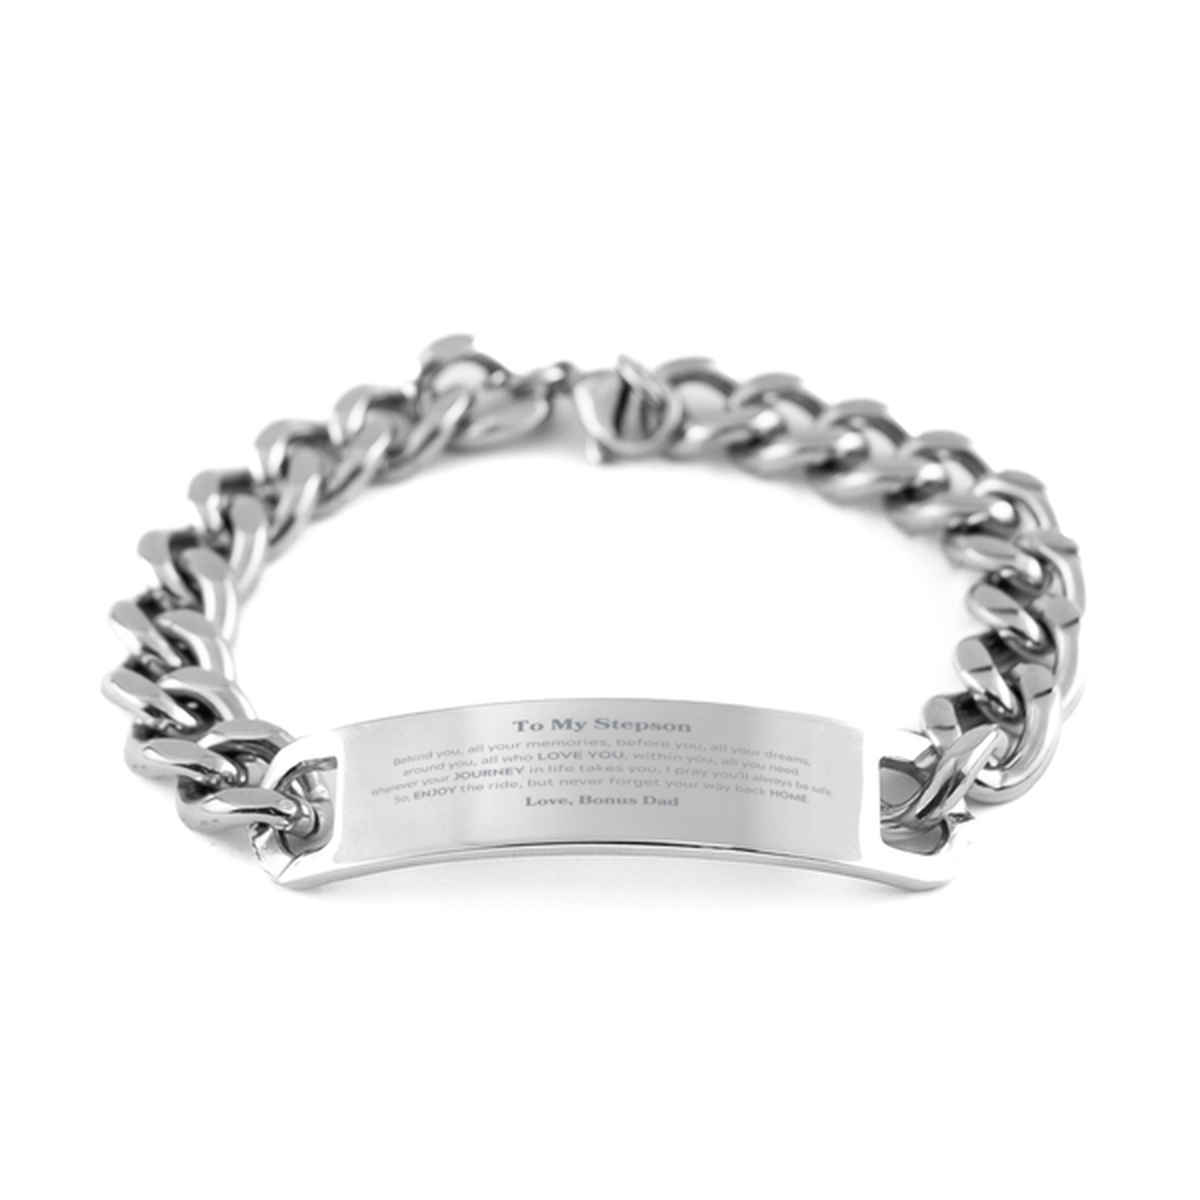 To My Stepson Graduation Gifts from Bonus Dad, Stepson Cuban Chain Stainless Steel Bracelet Christmas Birthday Gifts for Stepson Behind you, all your memories, before you, all your dreams. Love, Bonus Dad